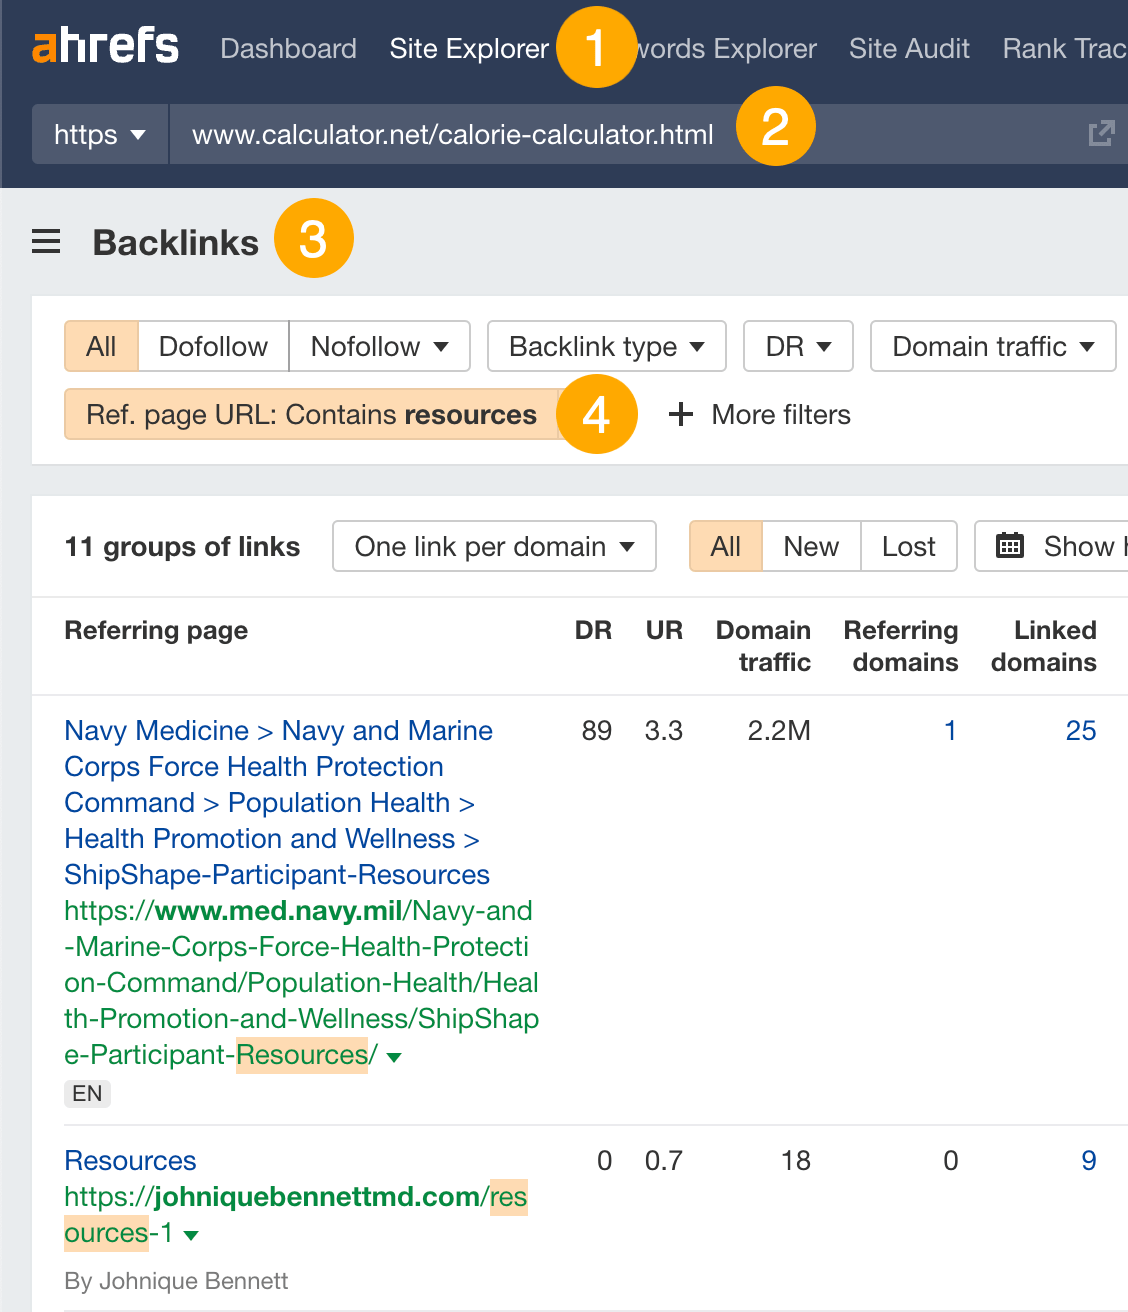 Finding resource pages in Ahrefs' Site Explorer